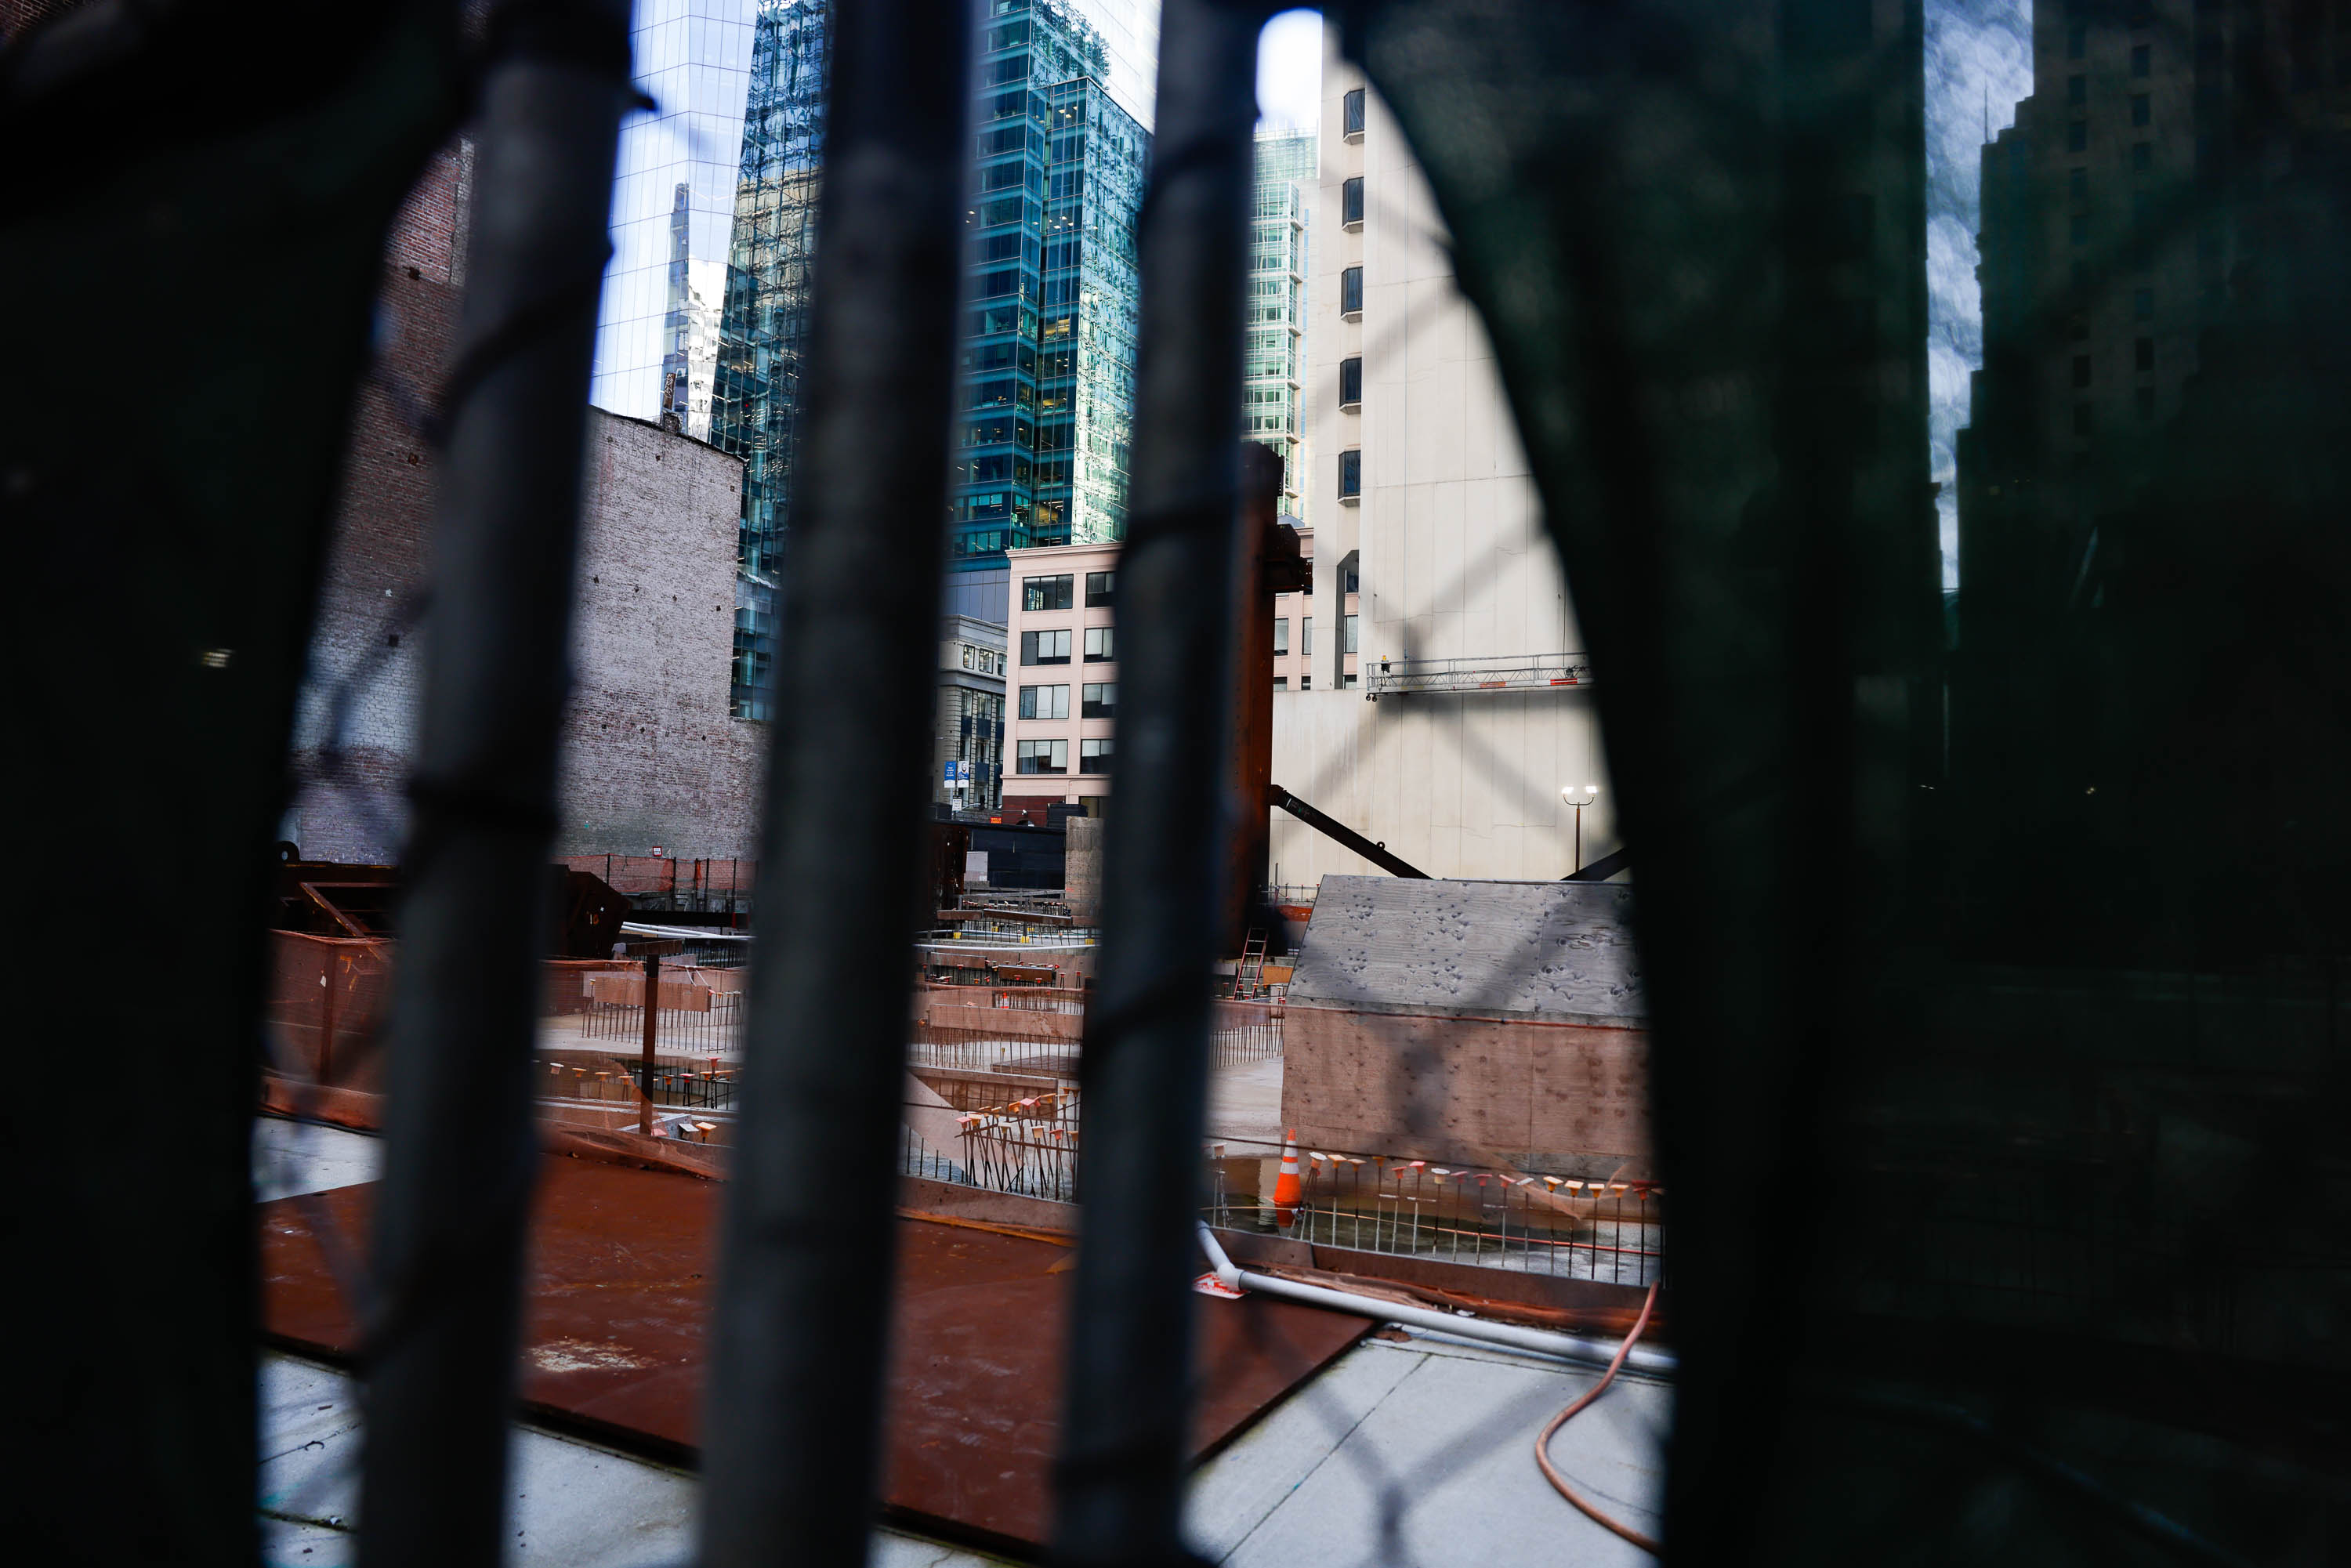 A construction site viewed through a fence, with urban buildings and skyscrapers in the background.